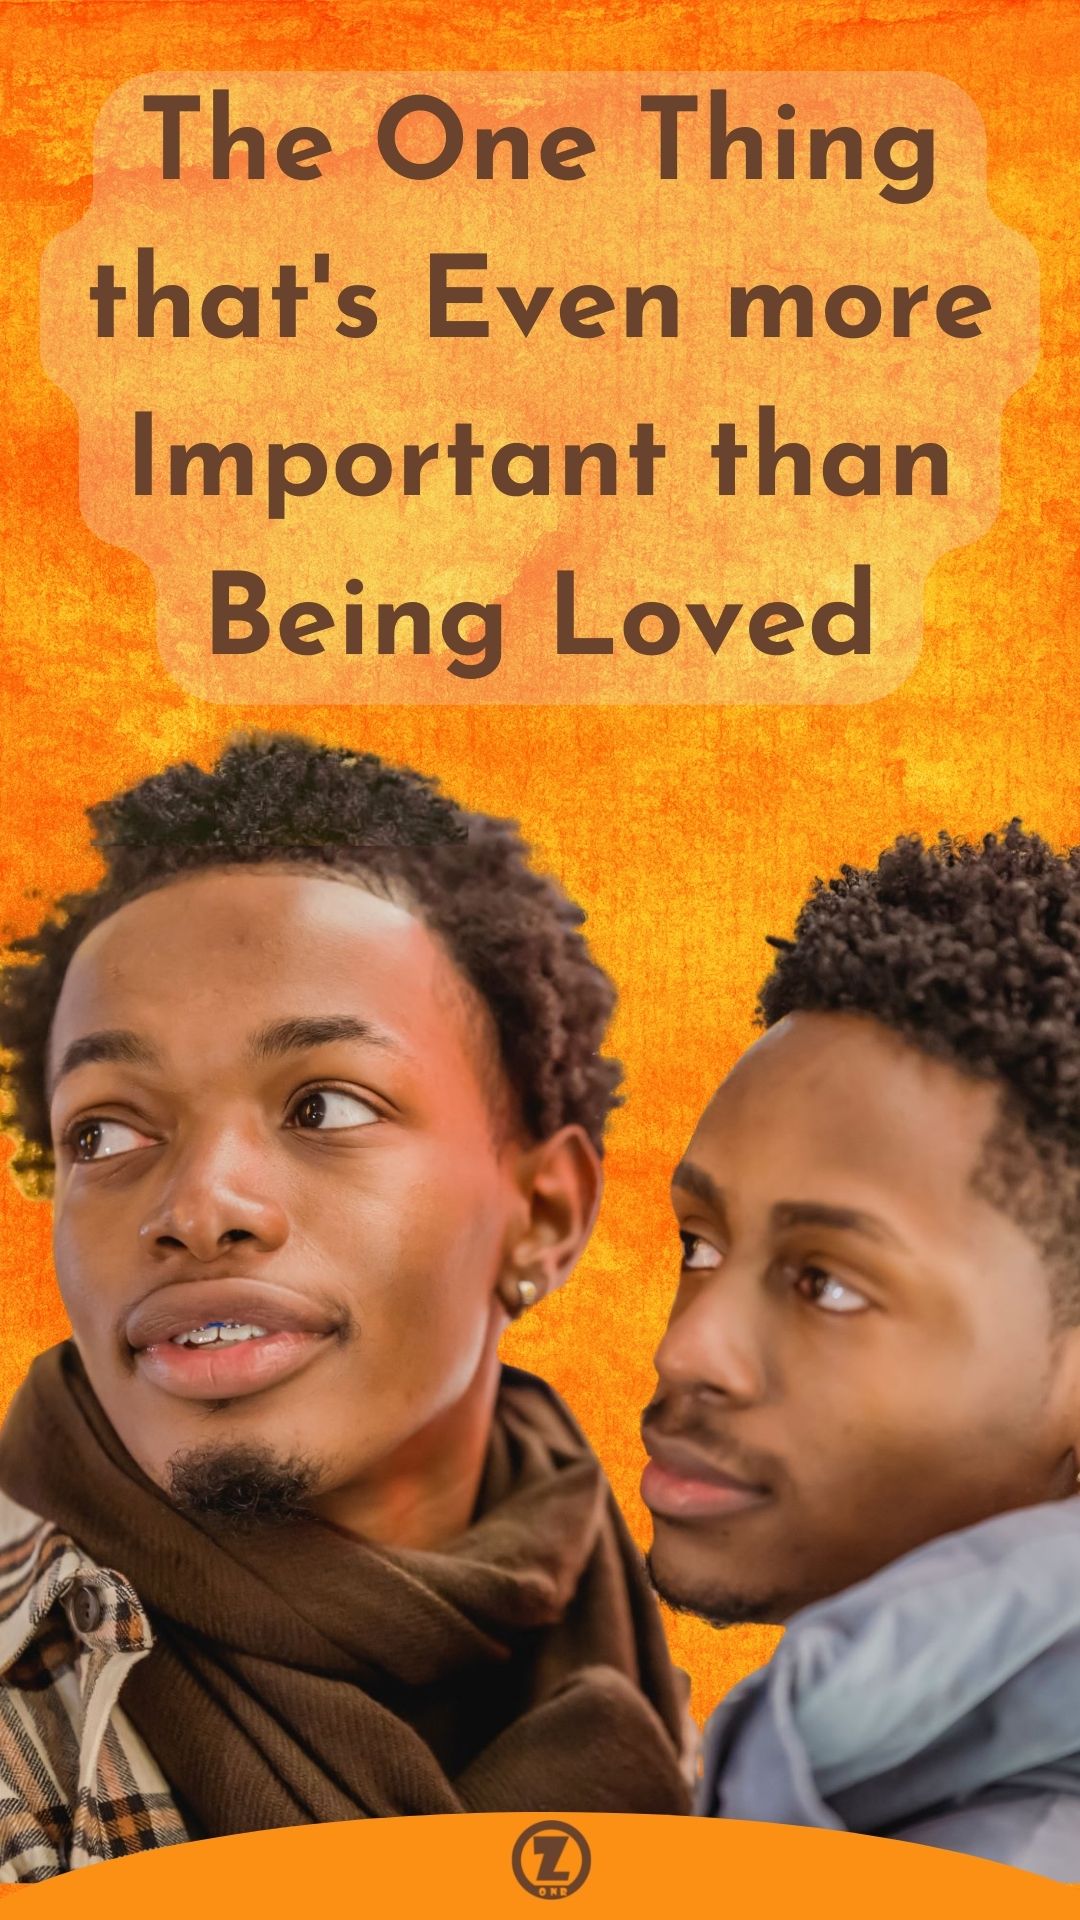 You are currently viewing The One Thing that’s Even more Important than Being Loved – Step 3